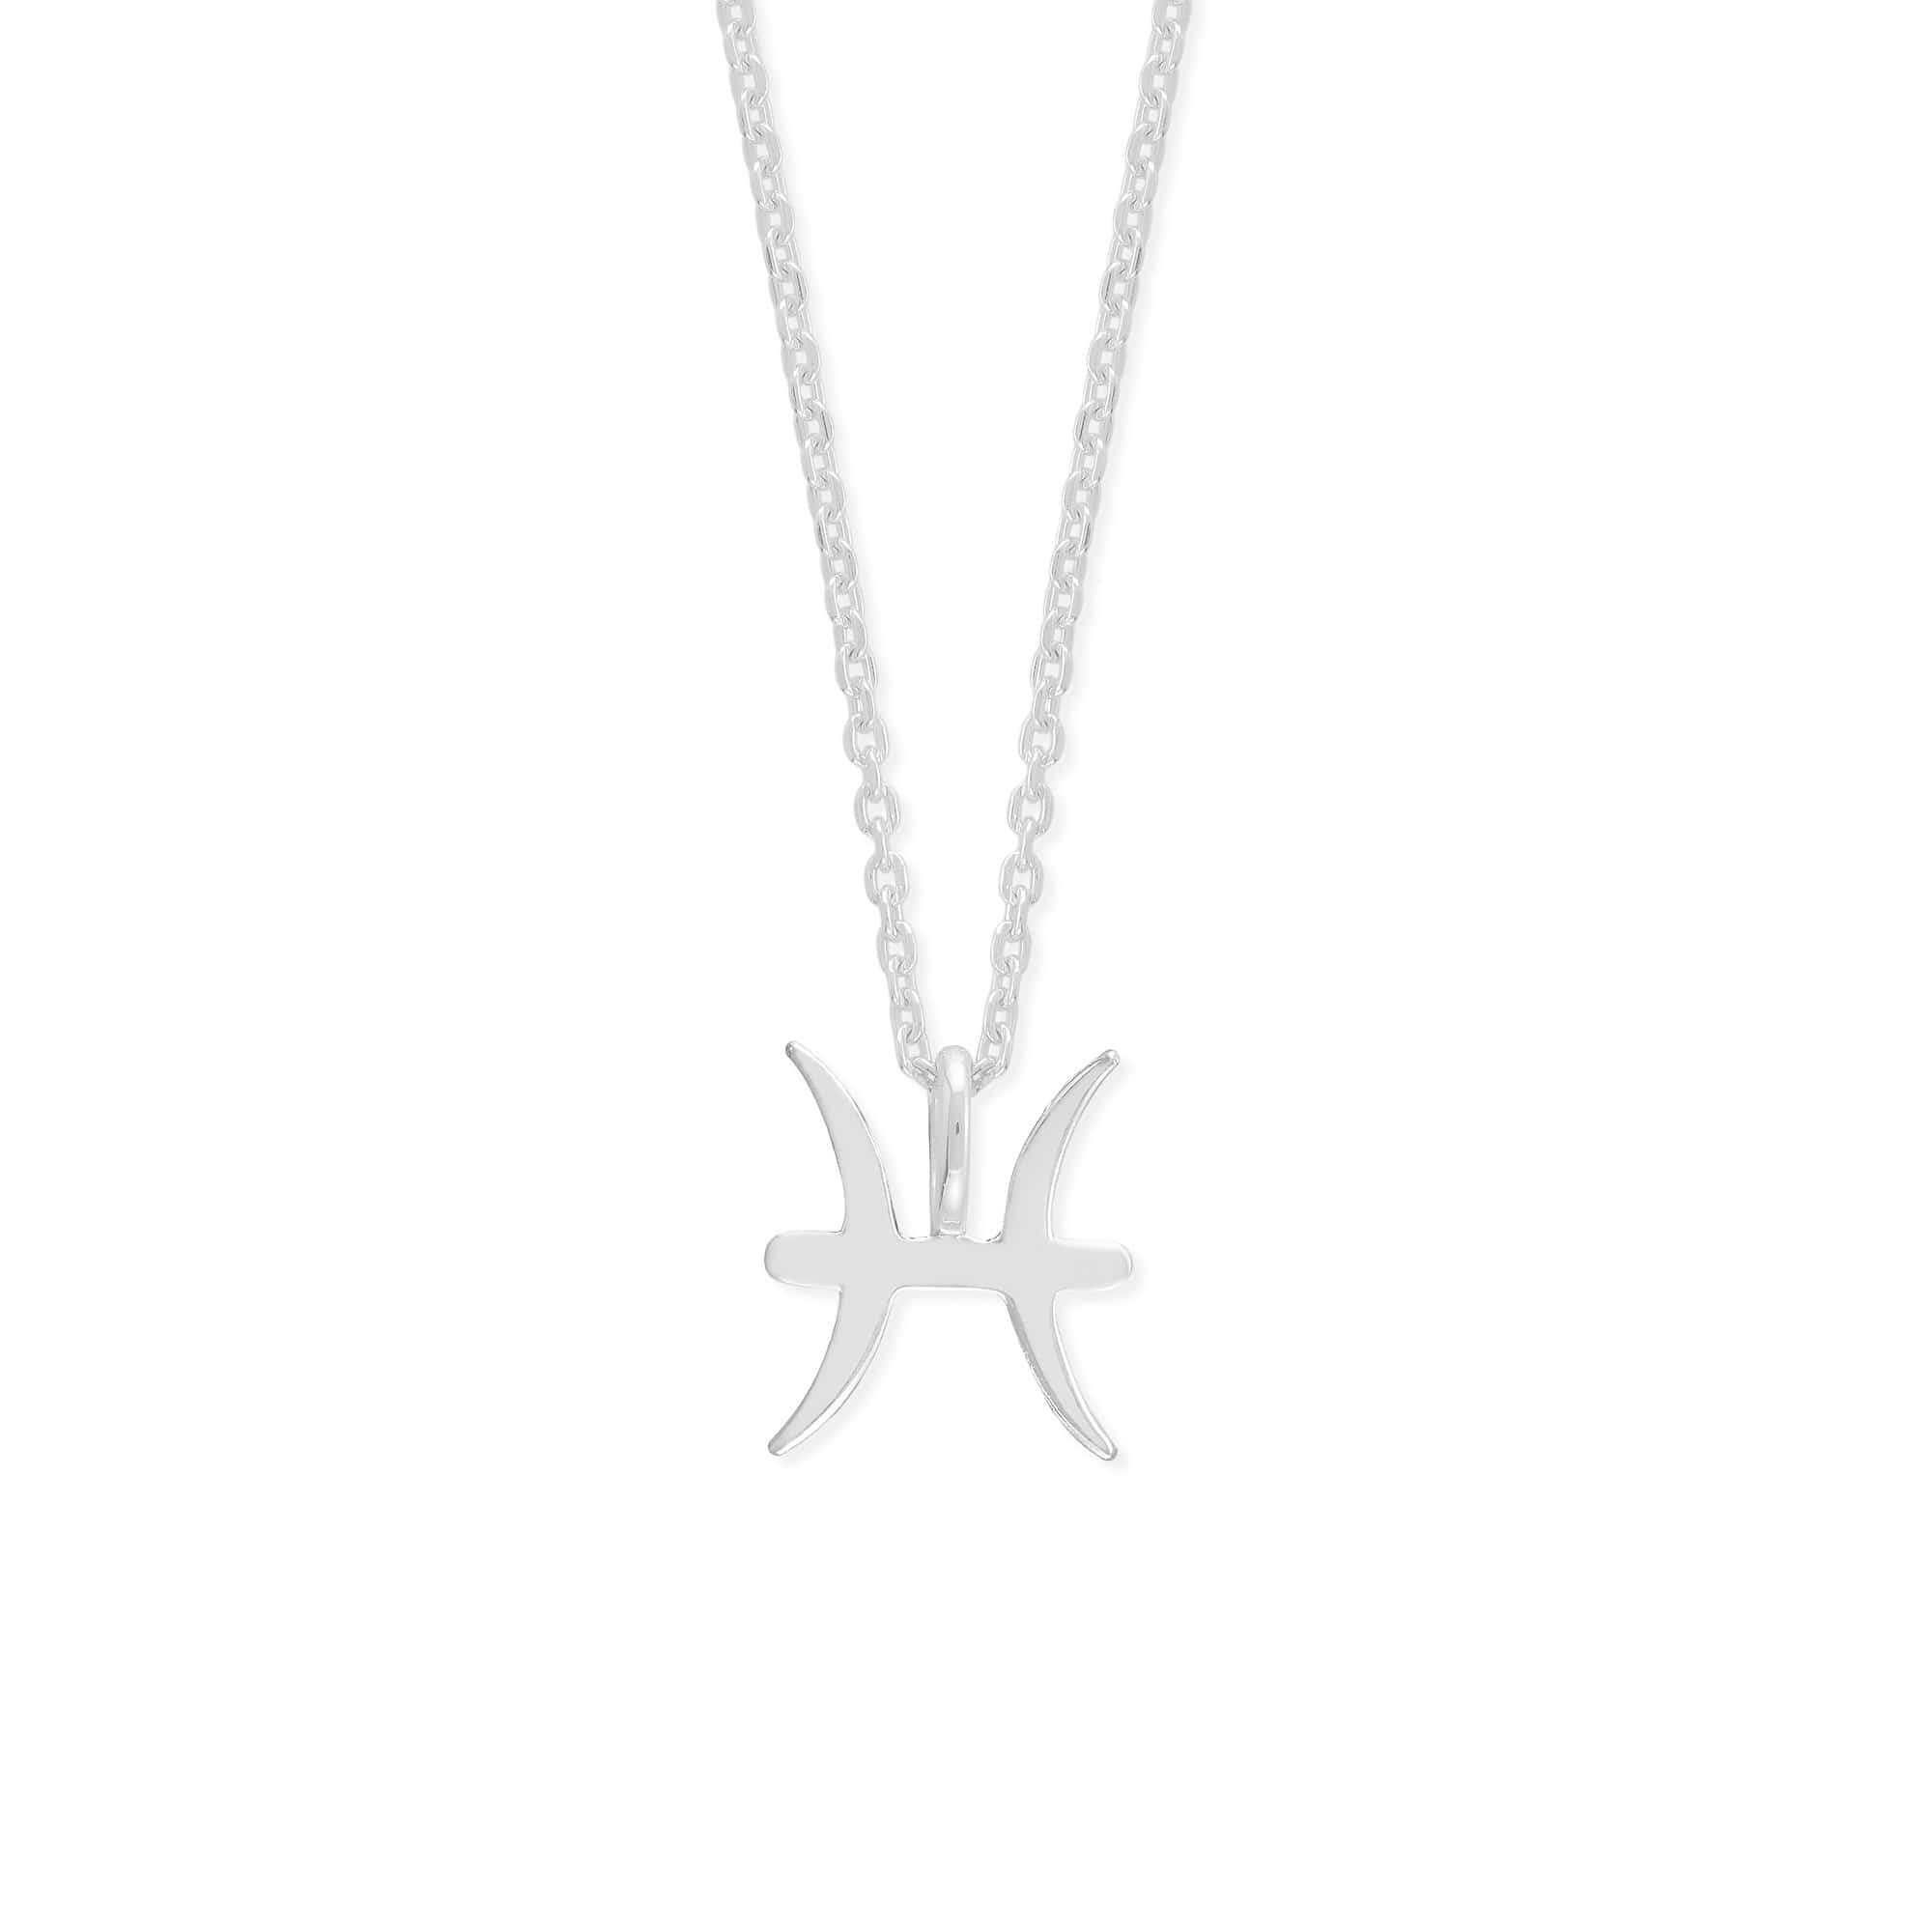 Boma Jewelry Necklaces Sterling Silver / Pisces Zodiac Necklace